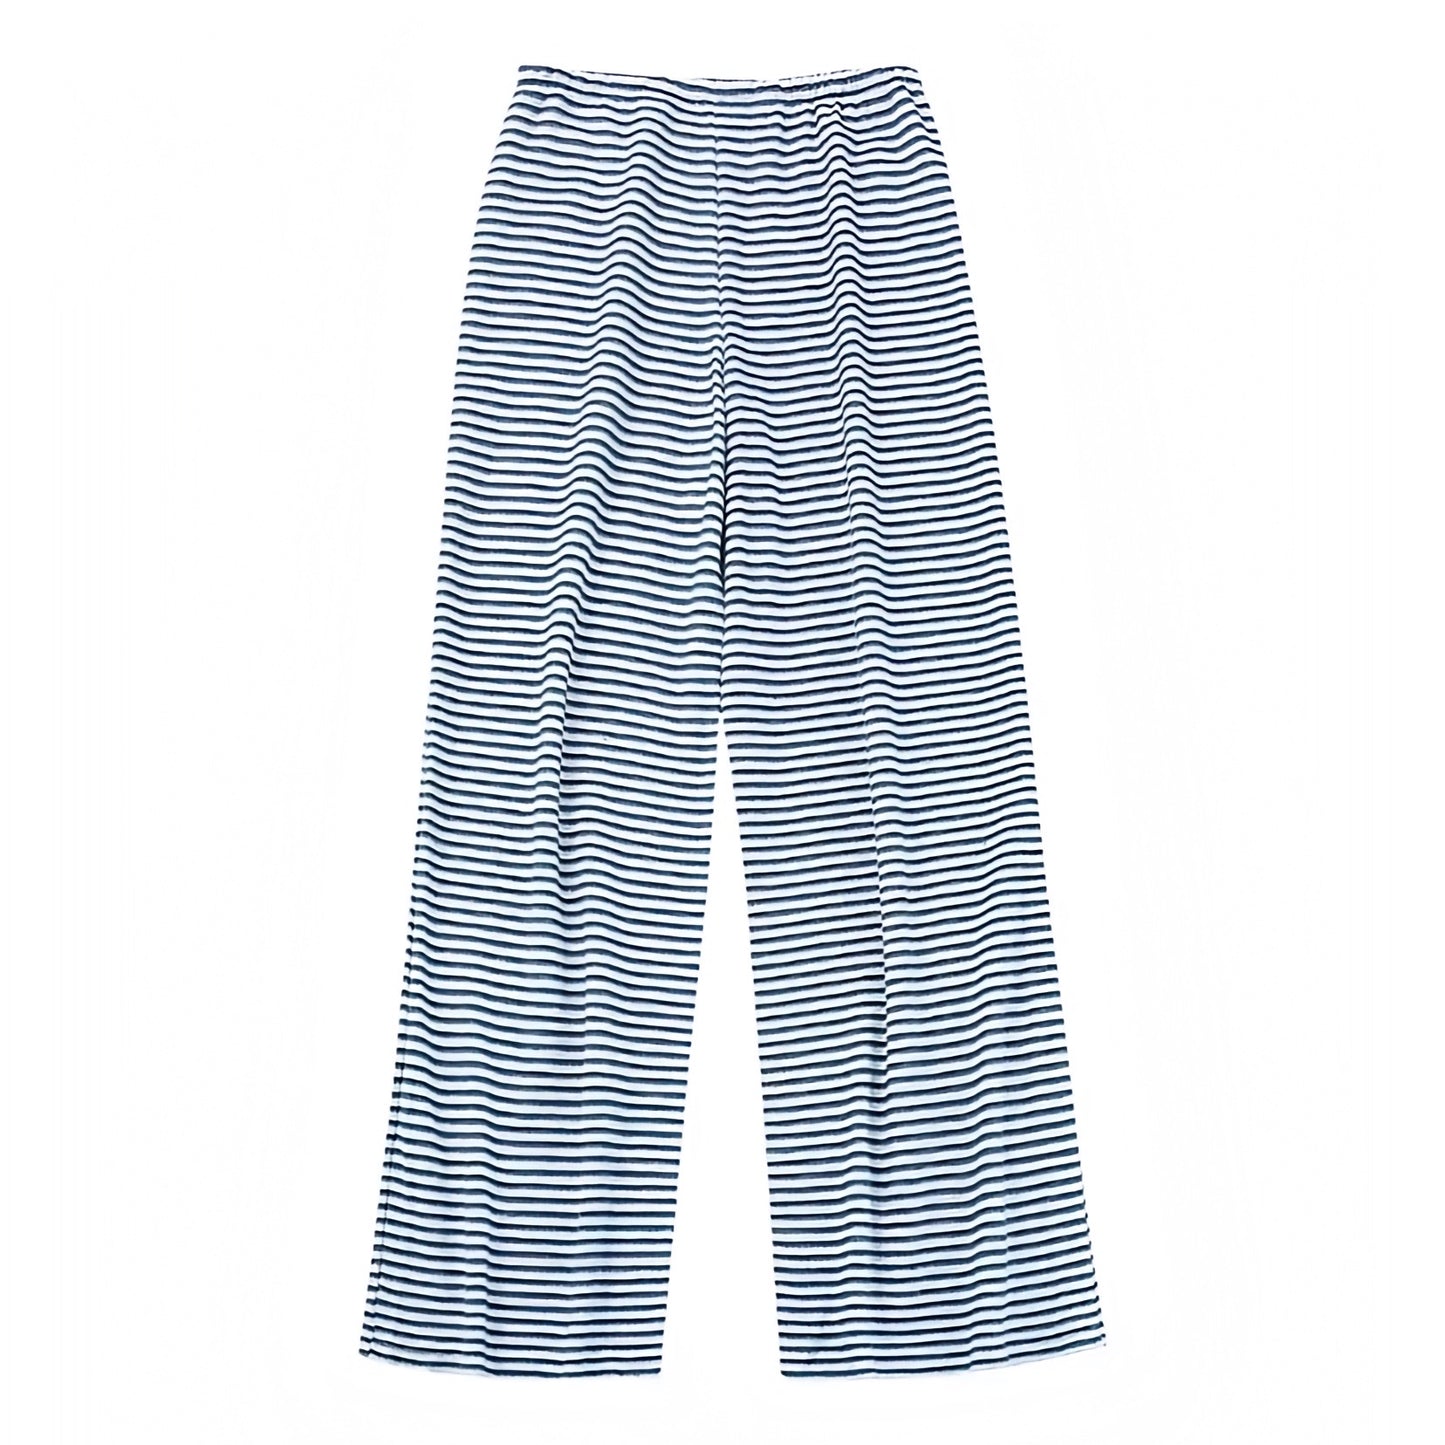 dark-navy-blue-and-white-striped-seersucker-pinstripe-print-patterned-cotton-linen-mid-low-rise-waisted-draw-string-tie-fitted-waist-straight-wide-leg-loose-oversized-trouser-pants-joggers-sweatpants-with-pockets-comfortable-cozy-women-ladies-chic-trendy-spring-2024-summer-elegant-casual-feminine-lounge-european-vacation-beach-wear-coastal-granddaughter-zara-revolve-aritzia-brandy-melville-pacsun